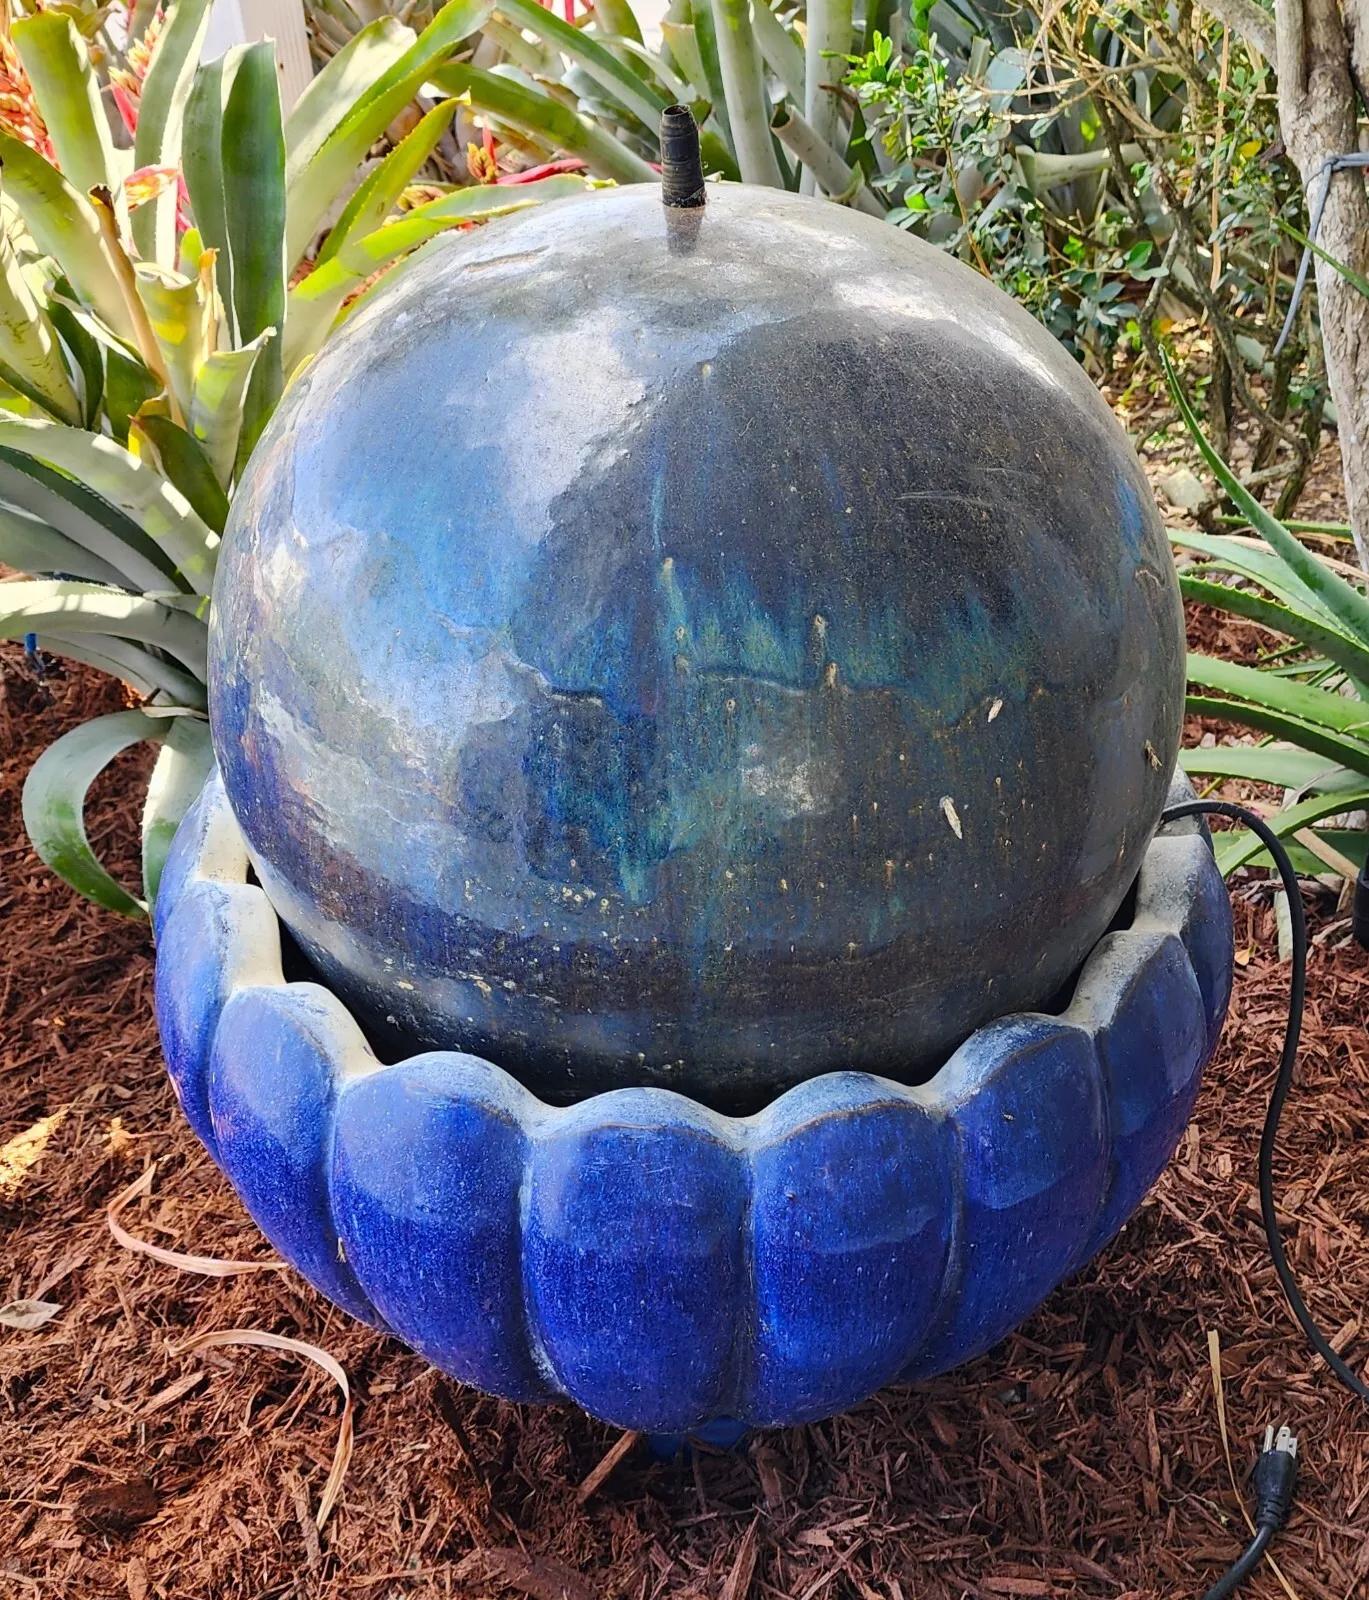 For FULL item description click on CONTINUE READING at the bottom of this page.

Offering One Of Our Recent Palm Beach Estate Fine Furniture Acquisitions Of A
Huge Vintage Ceramic Ball Water Fountain
34